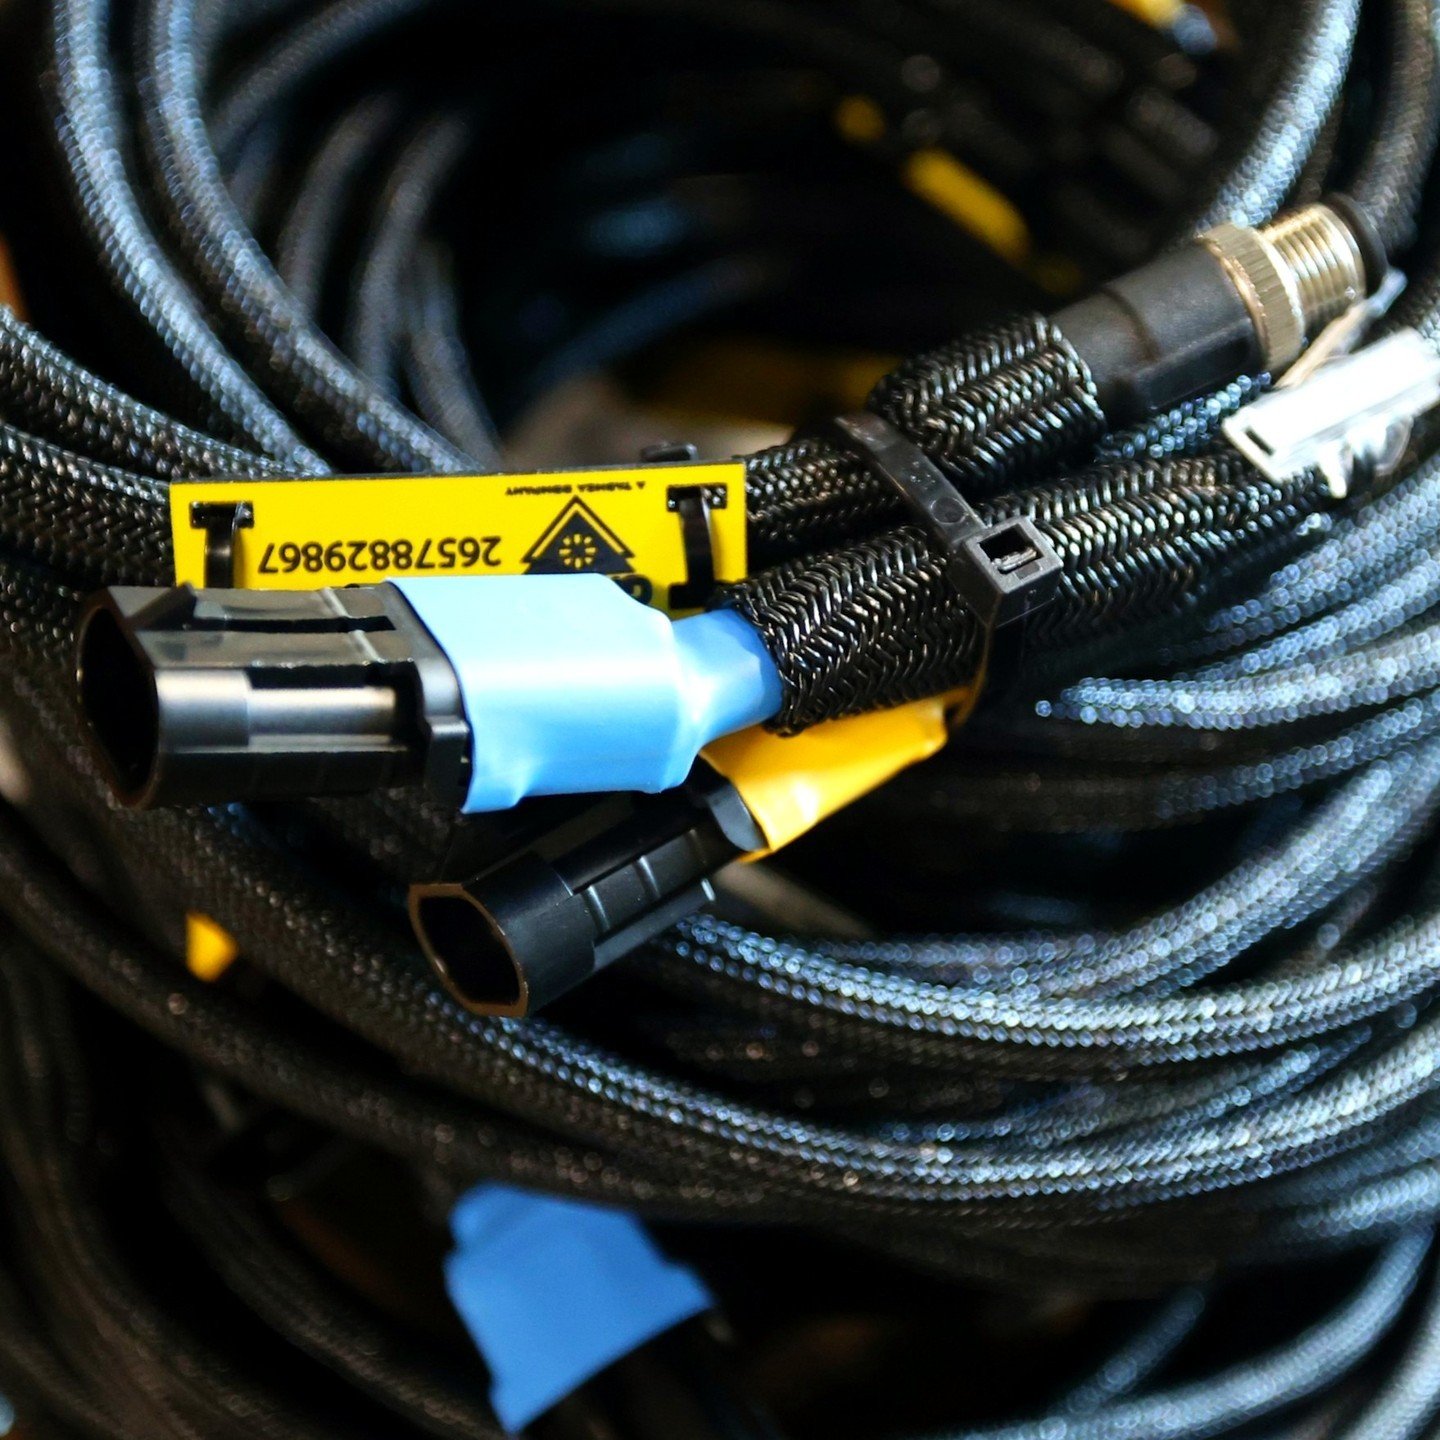 We provide next-level wiring solutions

Our wiring harnesses can be braided to suit difficult environmental challenges, as well as be pre-wired with a wide range of plugs and connectors to suit nearly any job.

Learn more about what auto electrical s